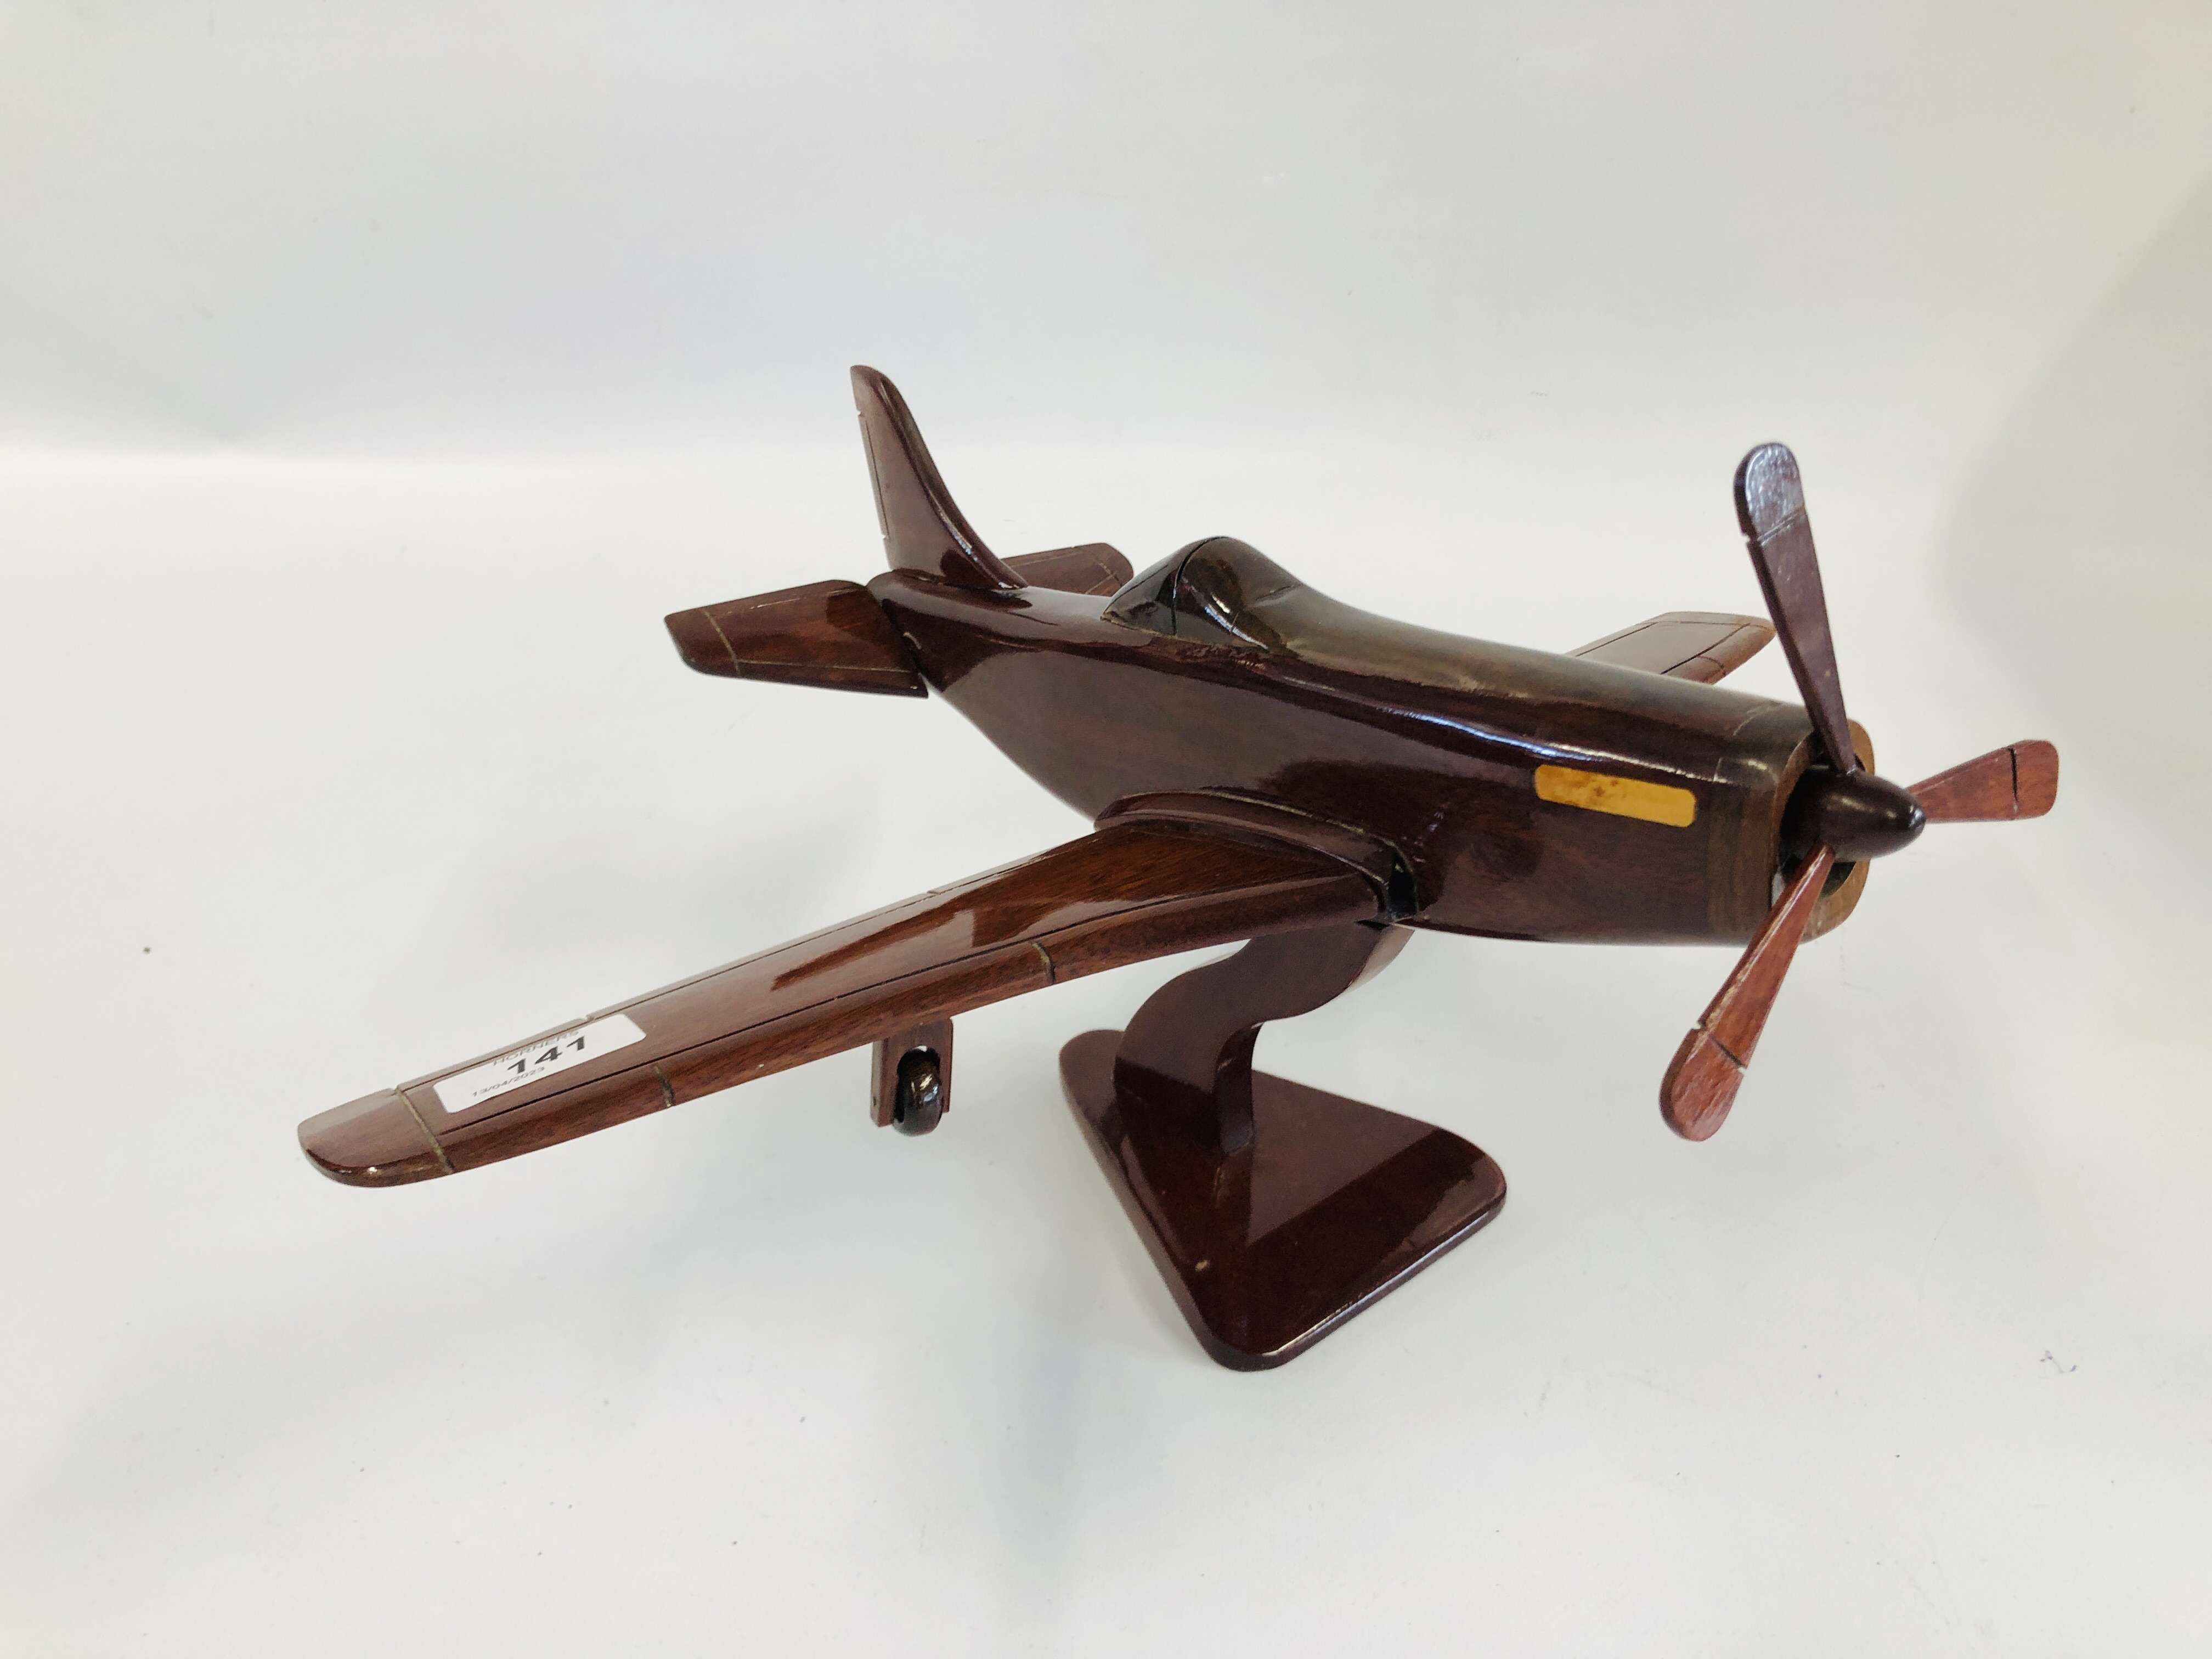 A HAND CRAFTED WOODEN SPITFIRE MODEL.